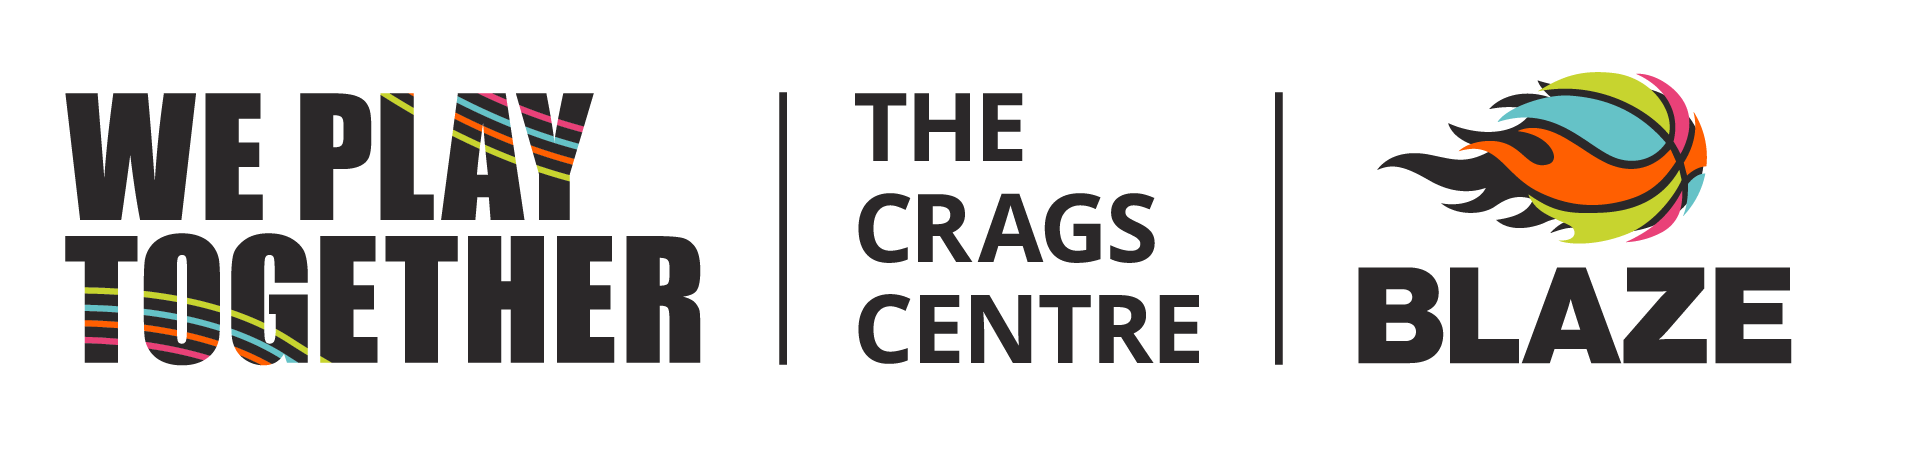 The Crags Centre